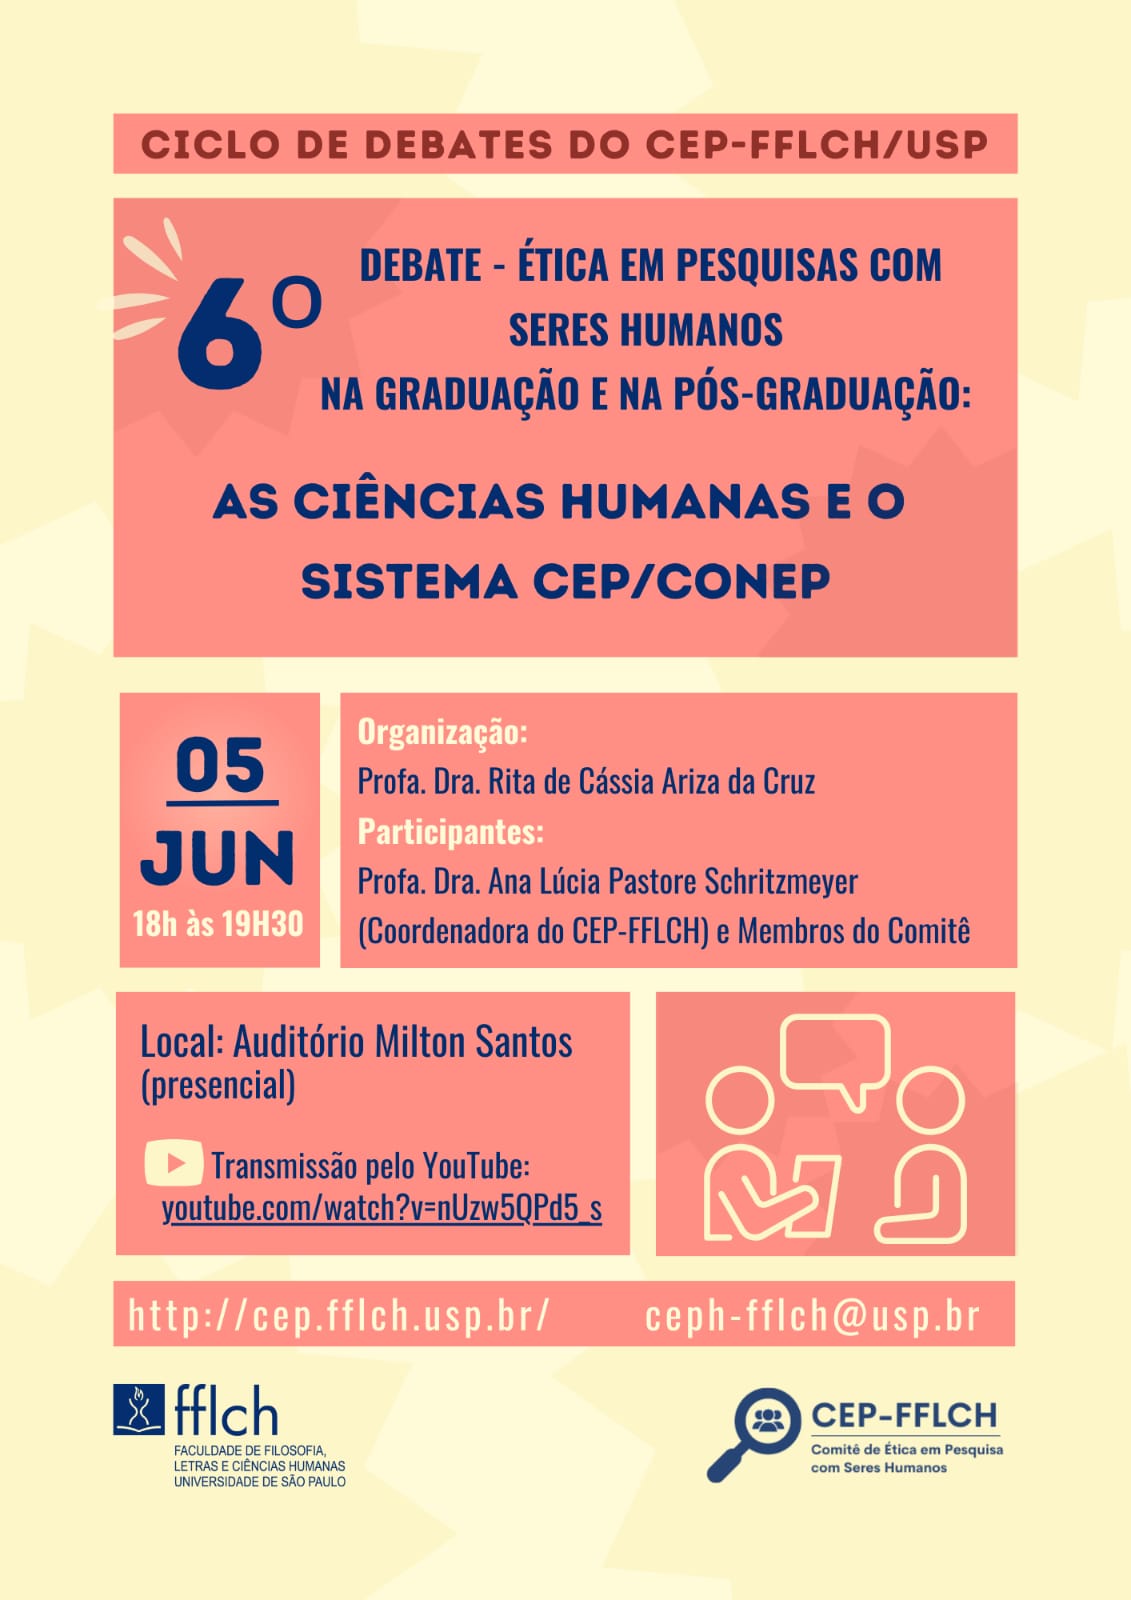 6th Debate - Ethics in research WITH HUMAN BEINGS at undergraduate and postgraduate levels: the Human Sciences and the CEP/CONEP System